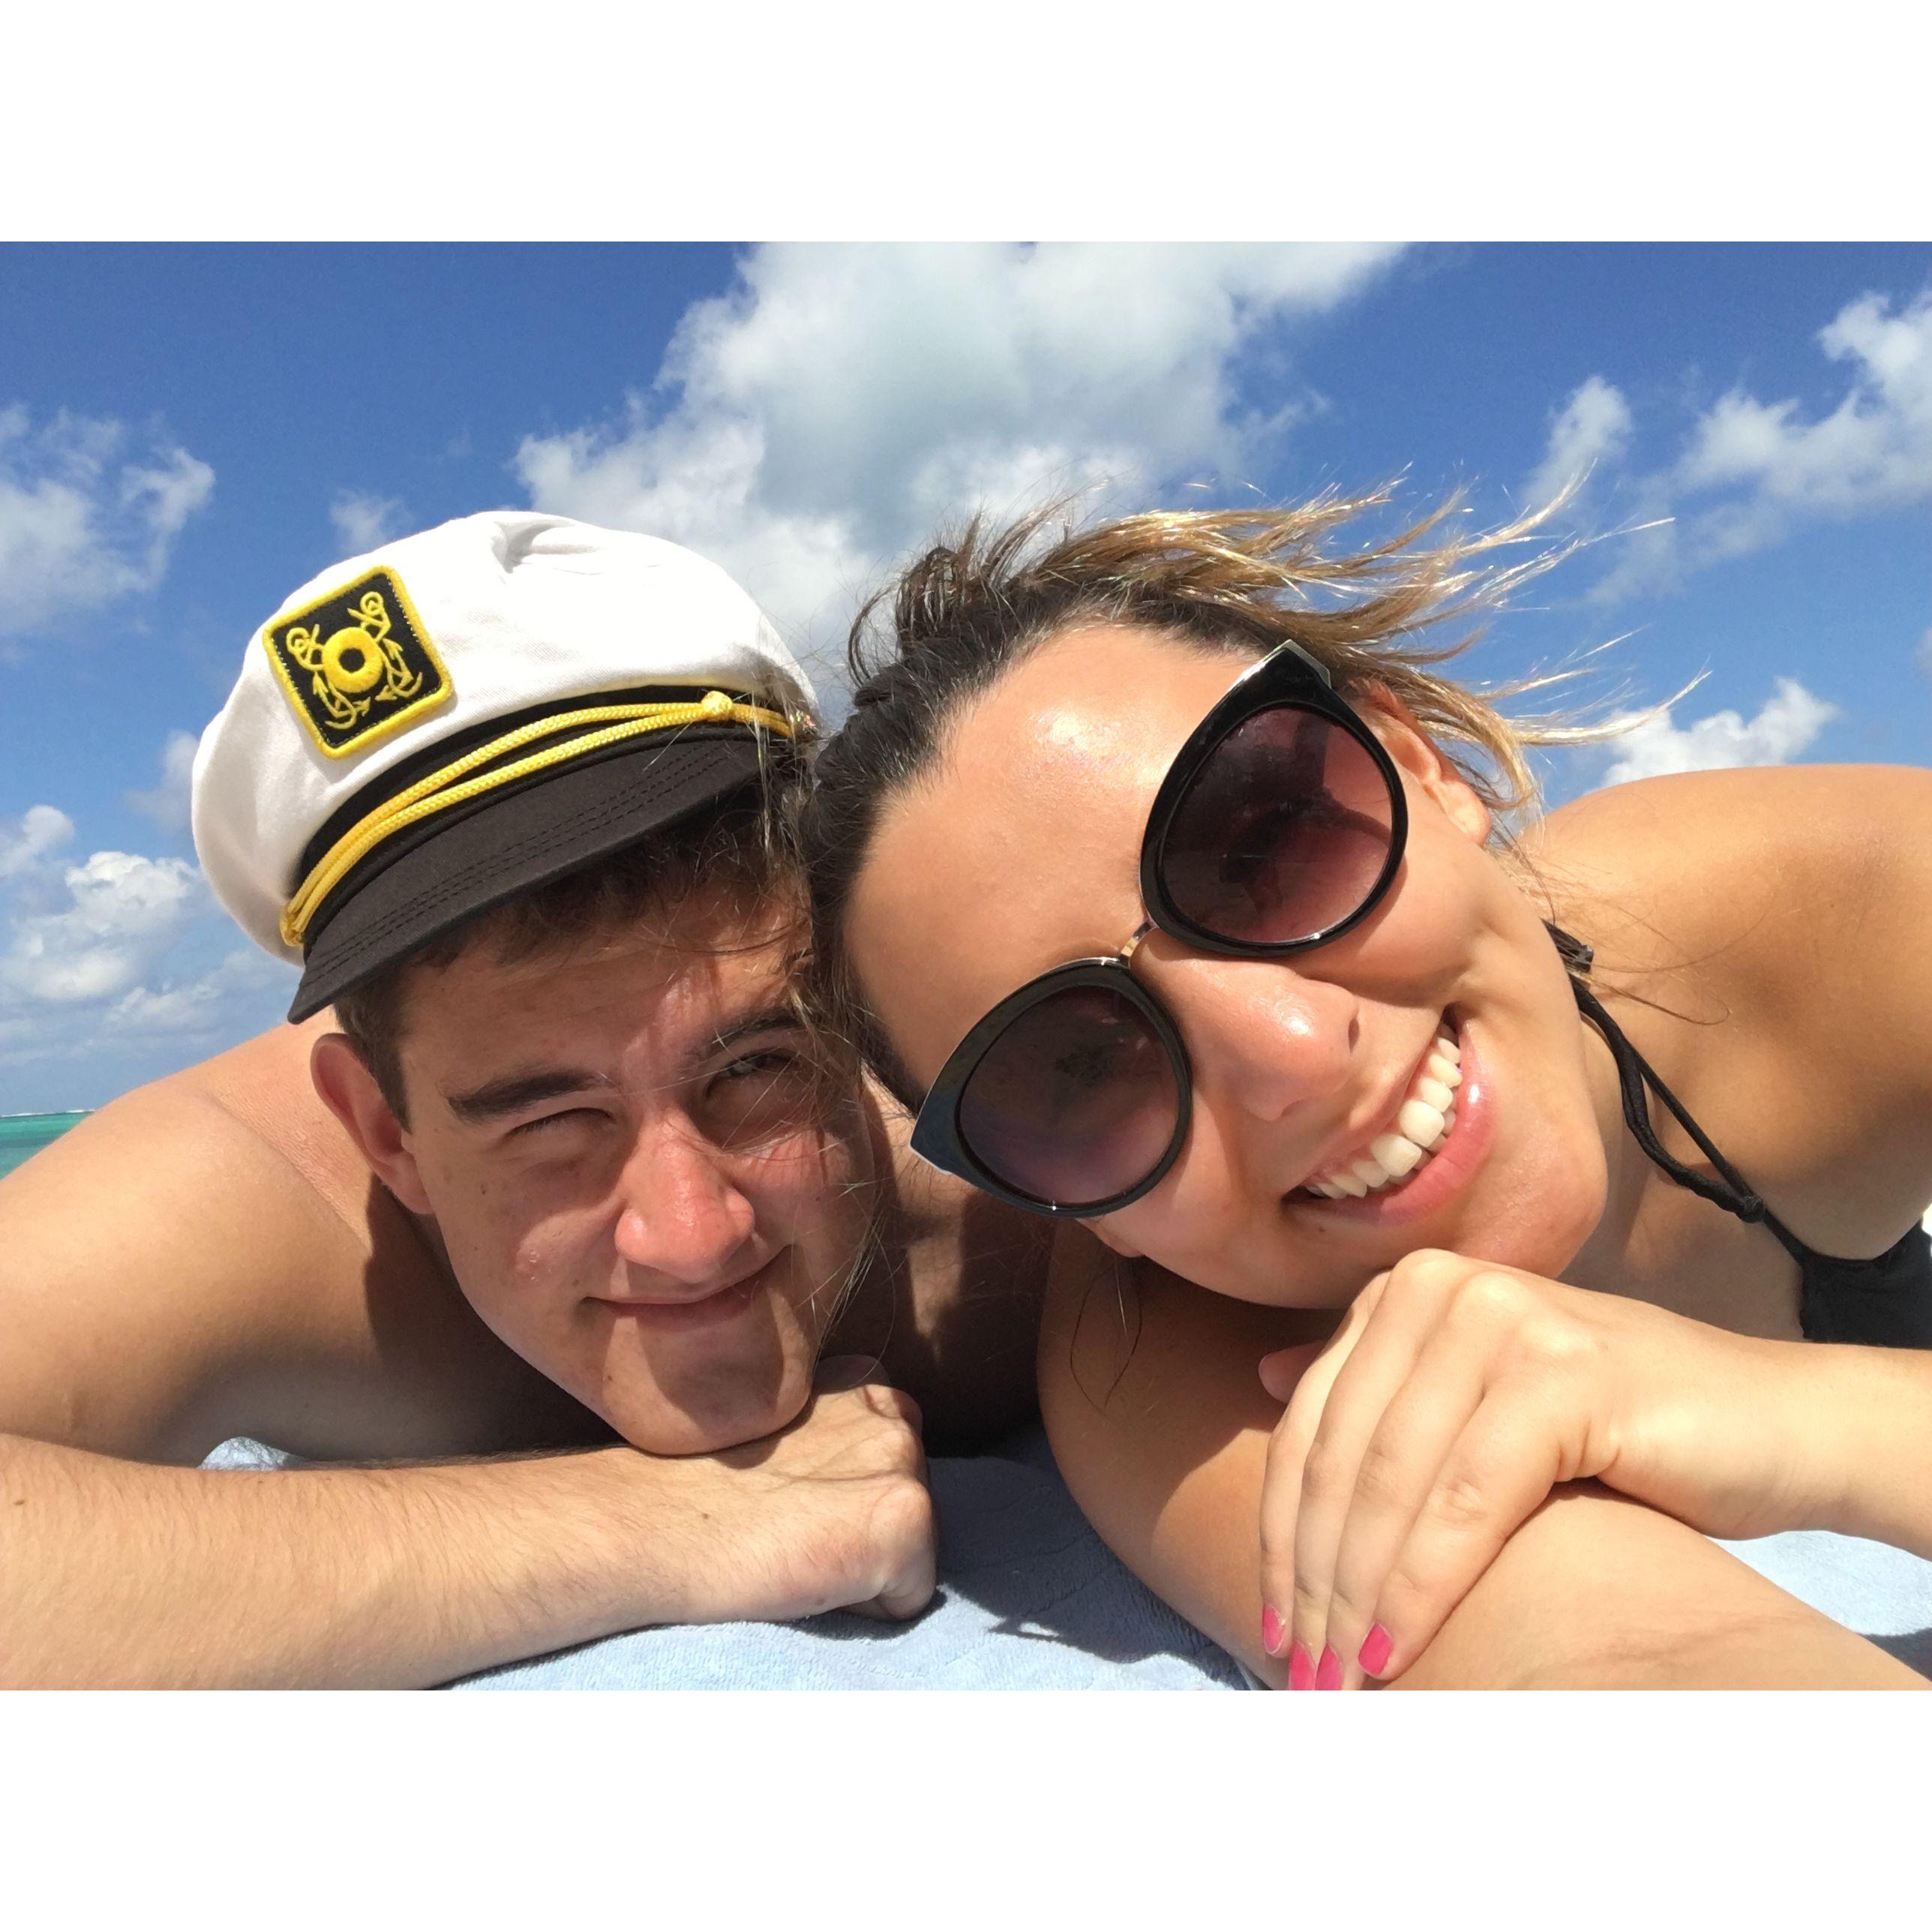 We enjoyed a beach day in Nassau, Bahamas during our college Spring Break. Jordan continues to refer to Fred as the Popeye to her Olive <3